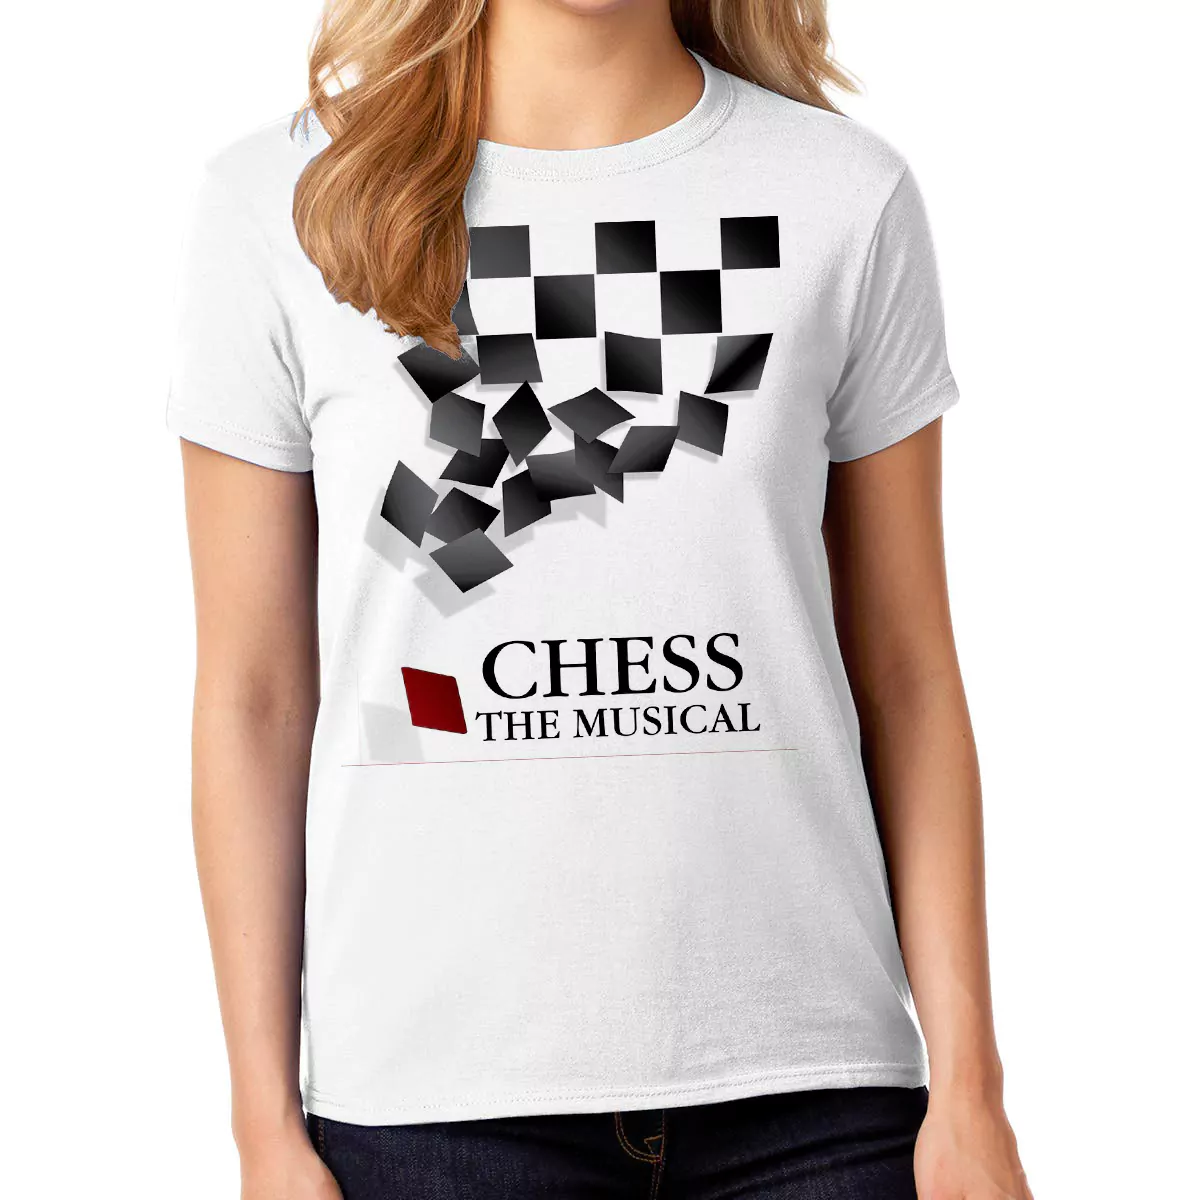 chess the musical t-shirt for girls